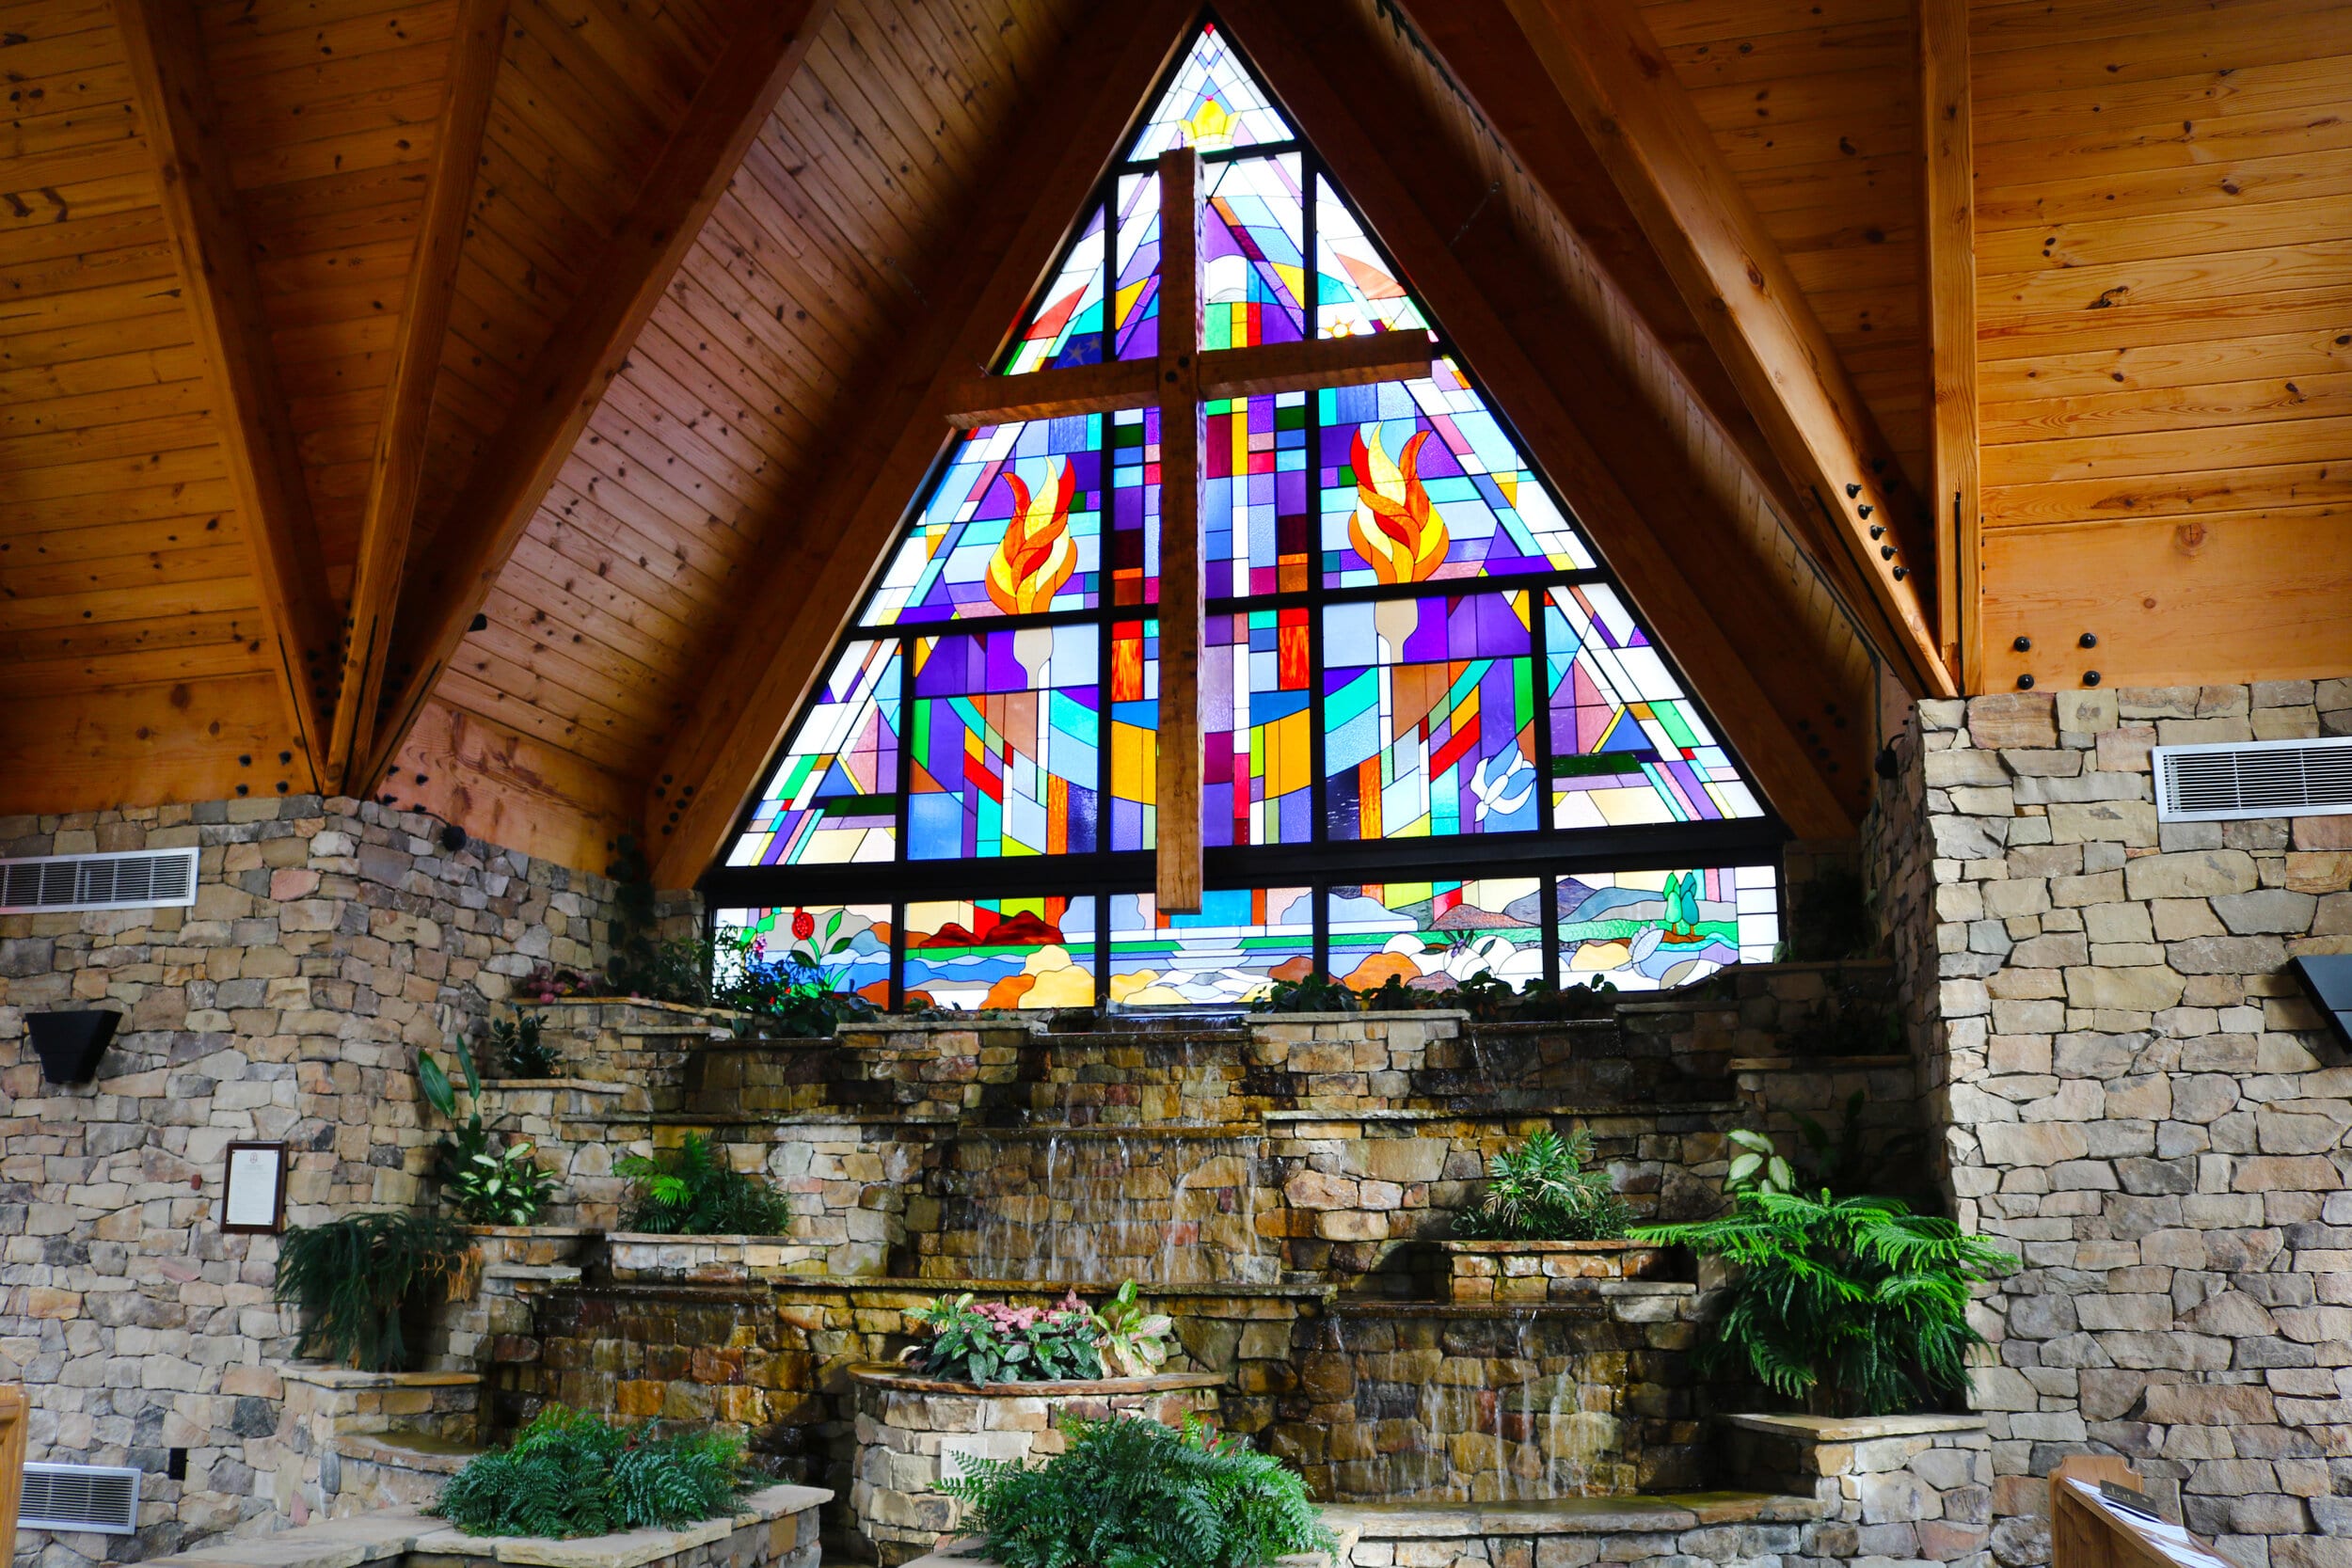 The stained glass window and the rock wall waterfall from a different point of view.